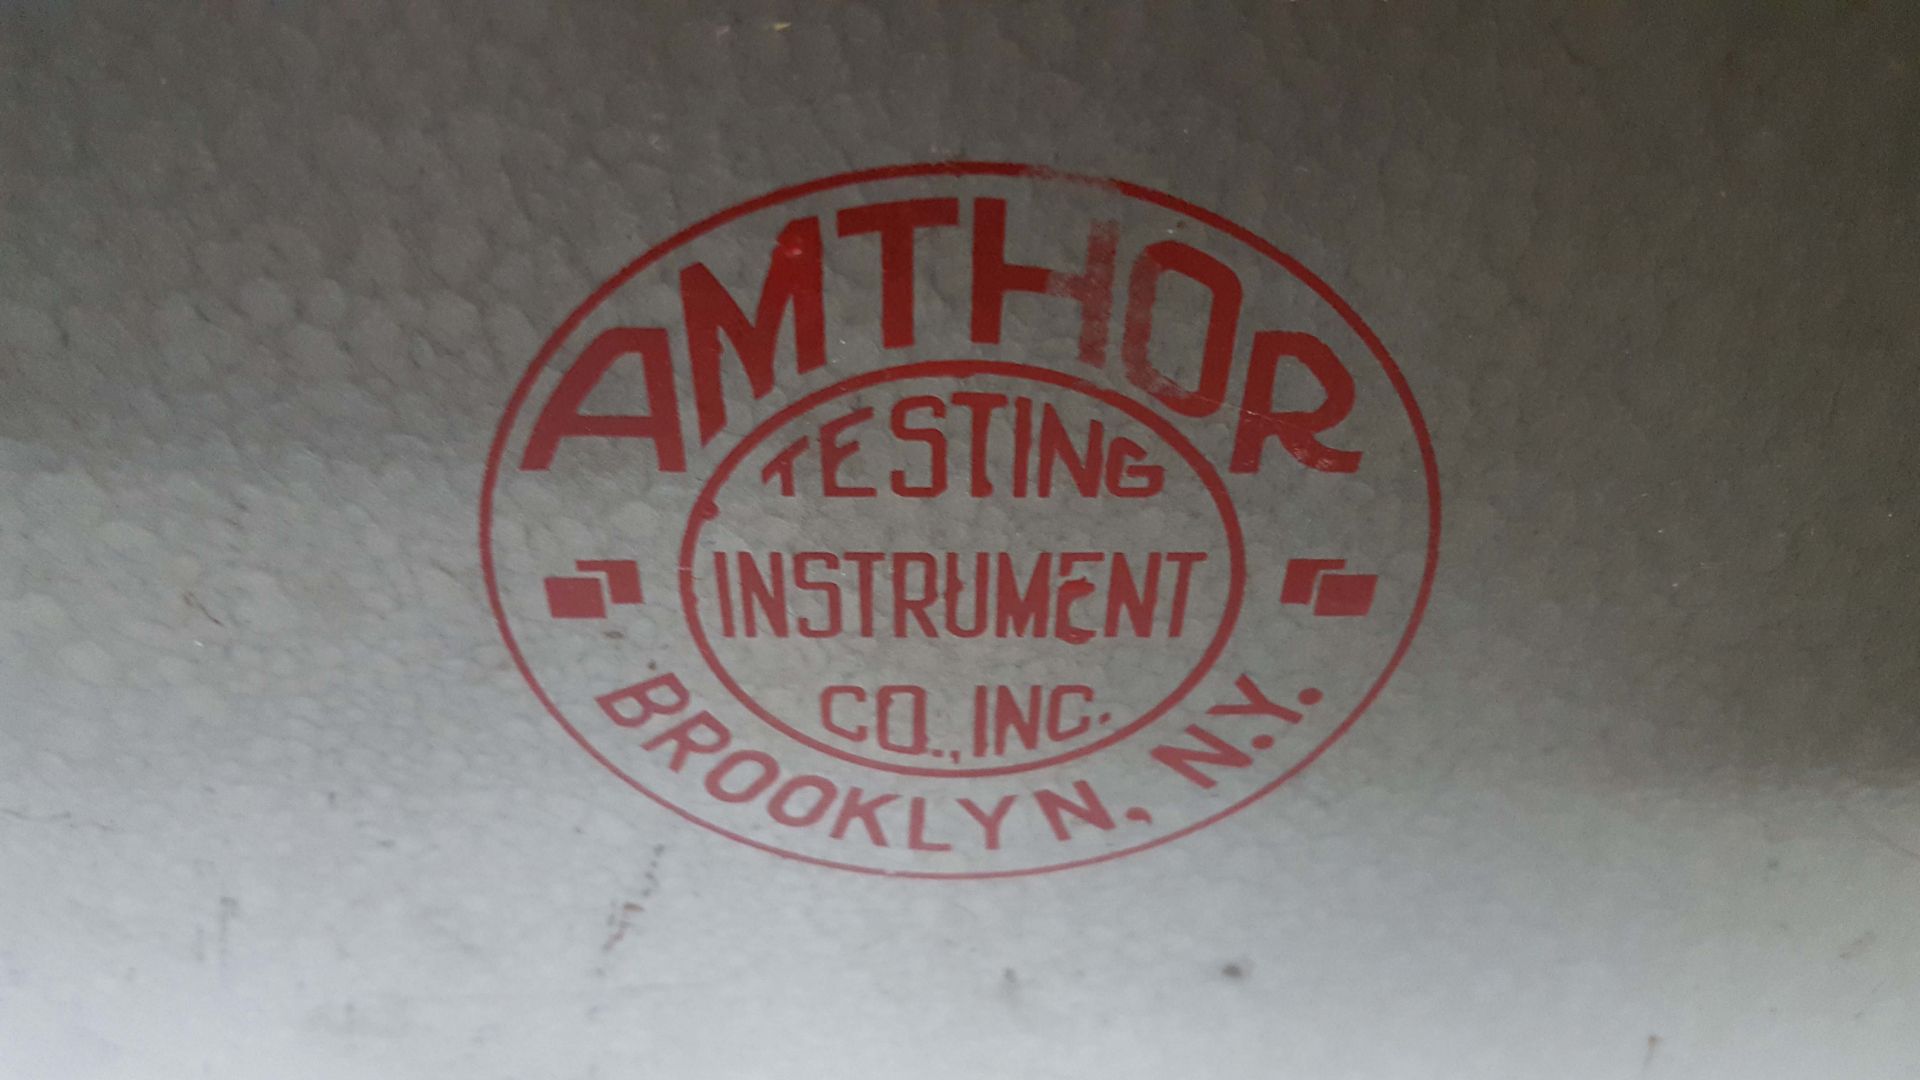 Amthor Dead Weight Pressure Tester Type 460 Range 200 PSI, s/n 15264 - Image 3 of 6